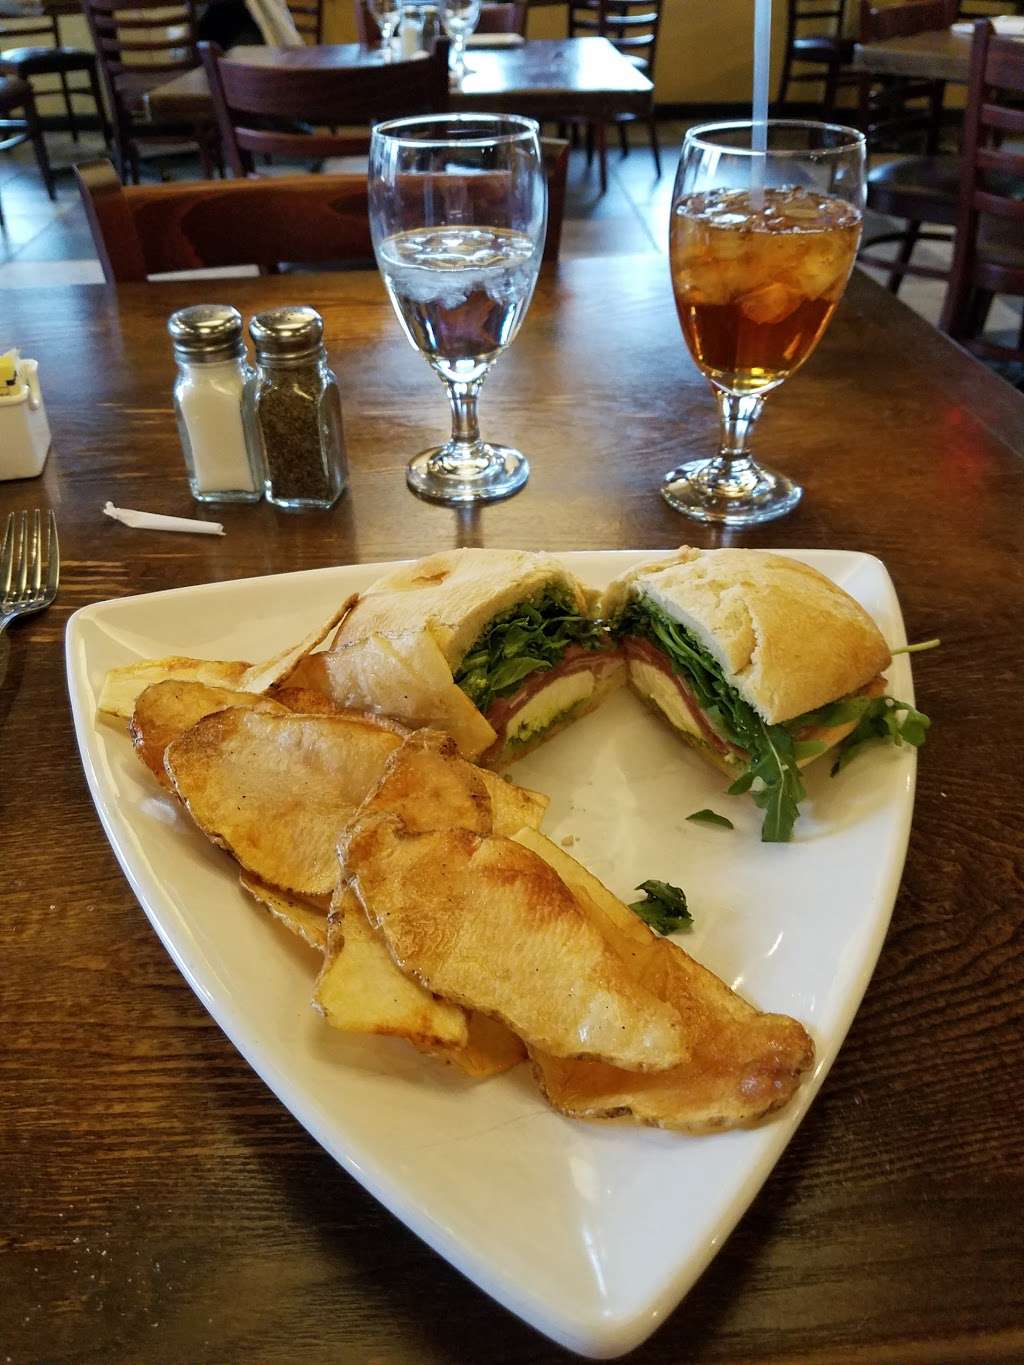 Arugula Ristorante | 275 Wilmington West Chester Pike, Chadds Ford, PA 19317 | Phone: (610) 358-0888